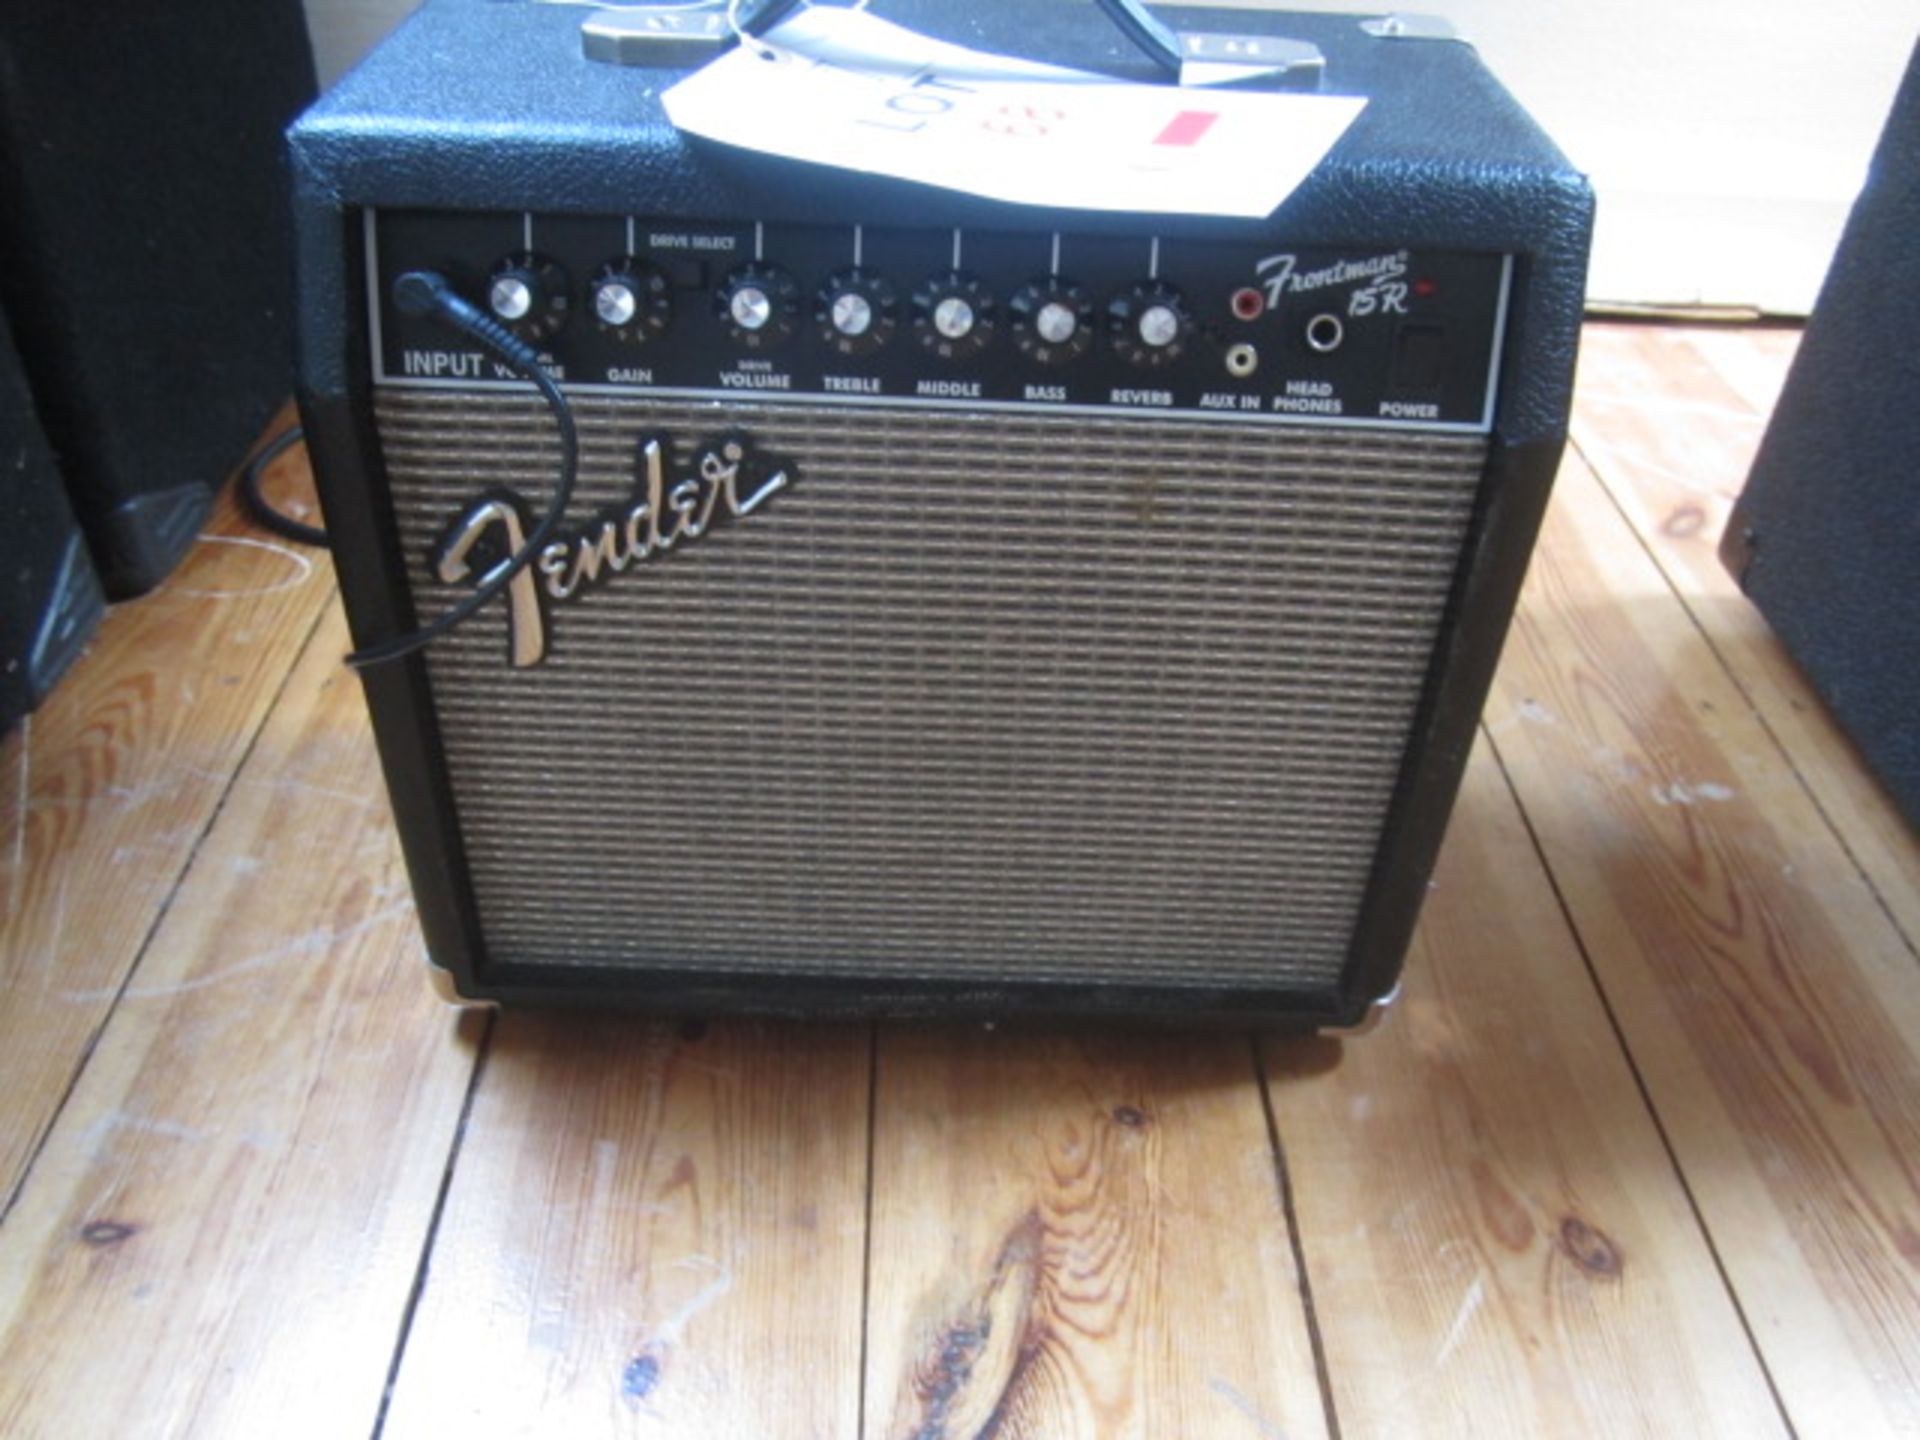 Fender Frontman's 15R speaker,Located at main school,** Located at Shapwick School, Station Road,